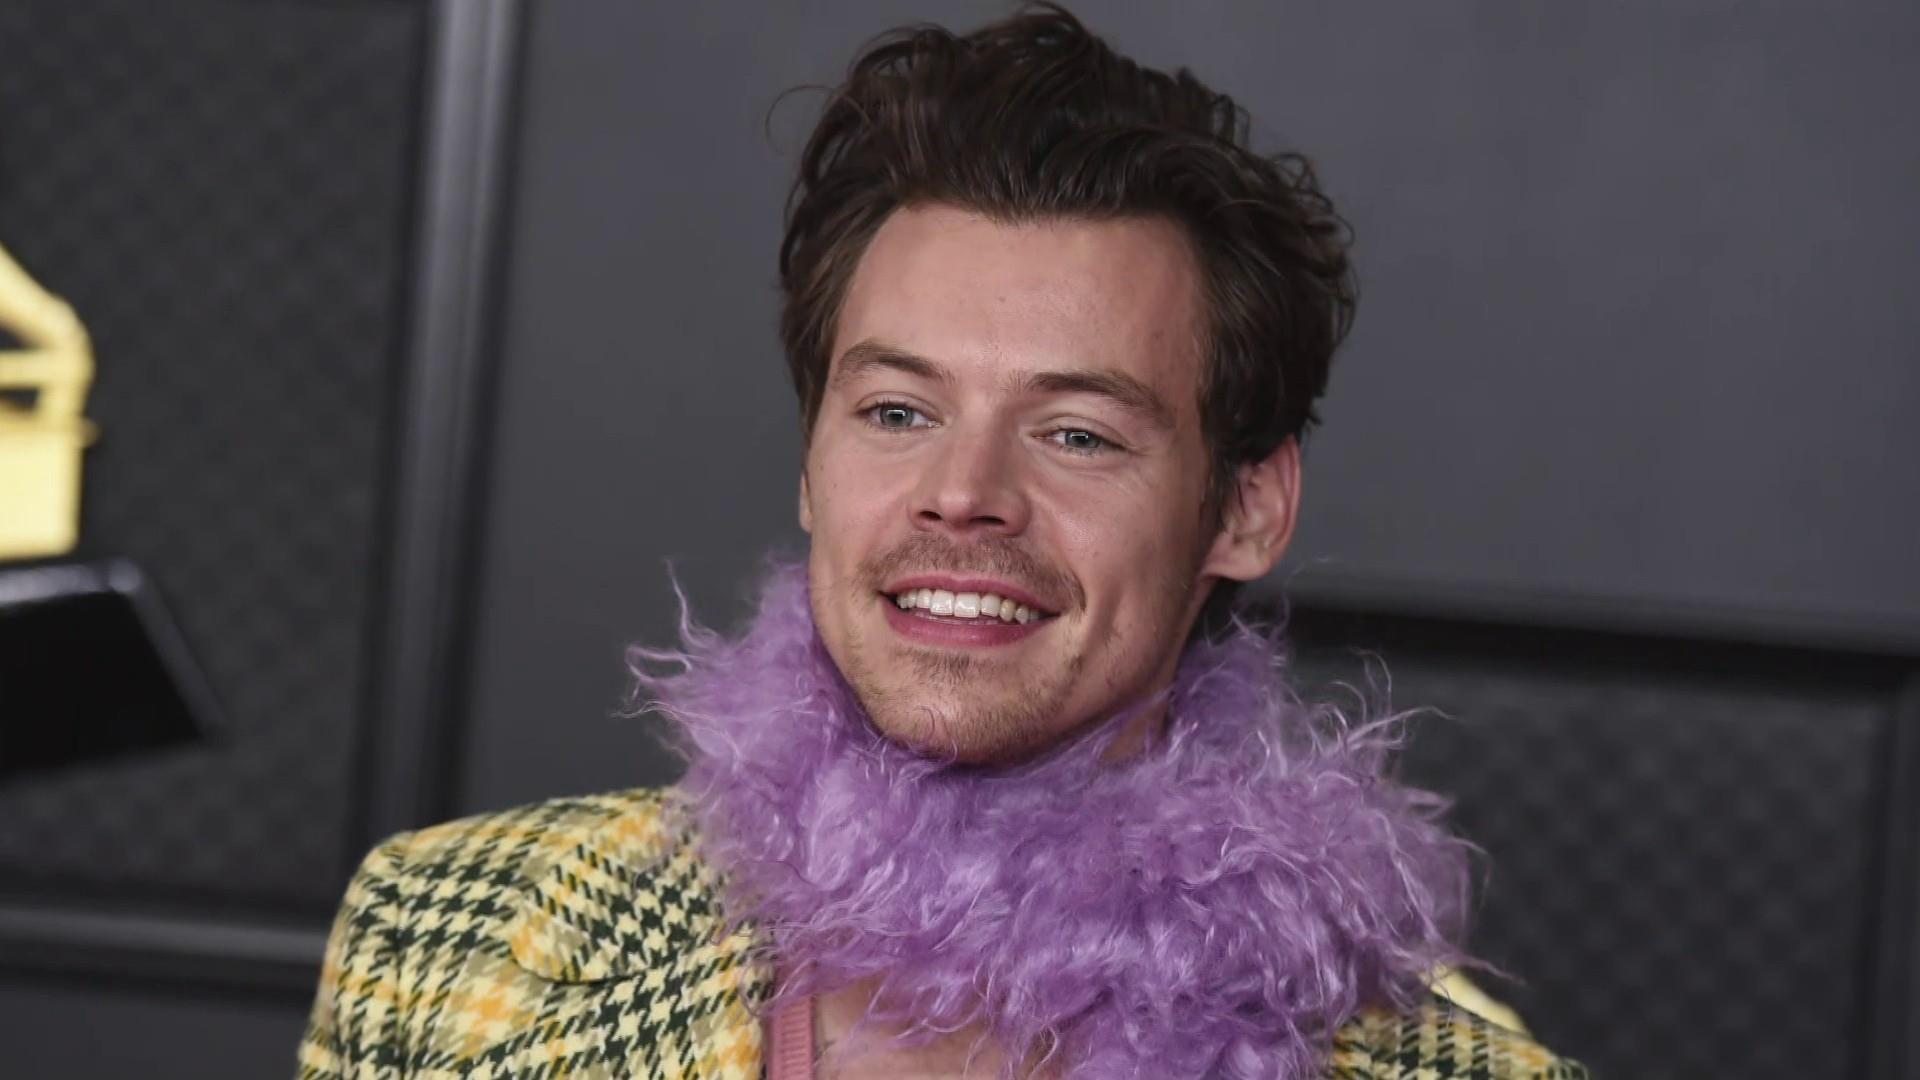 Feather boas are trending, thanks to Harry Styles' Grammys look